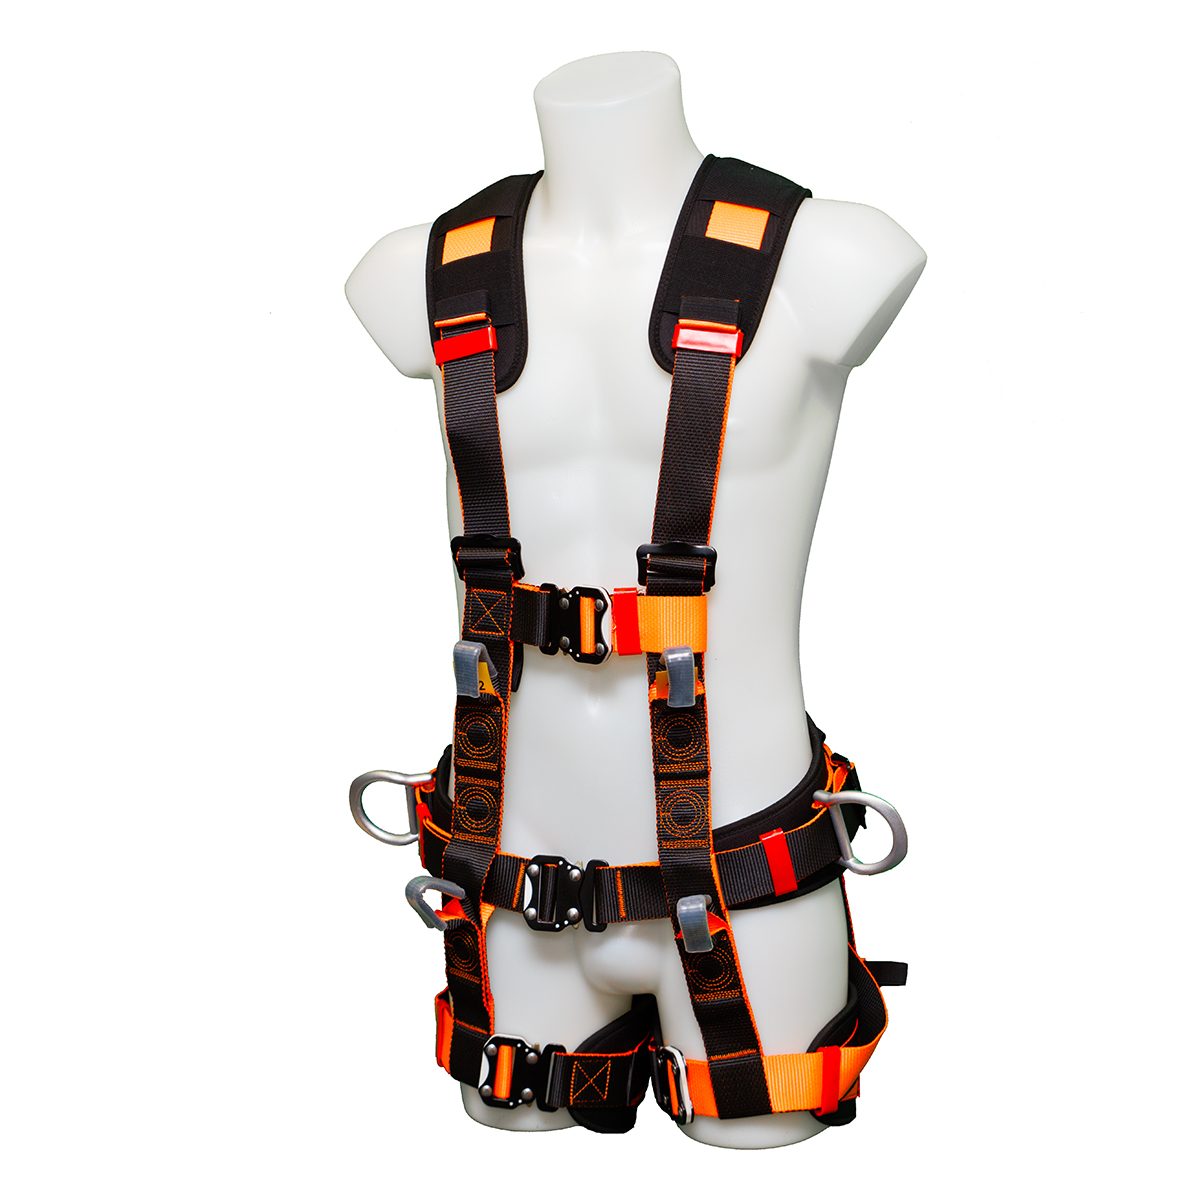 7 point harness